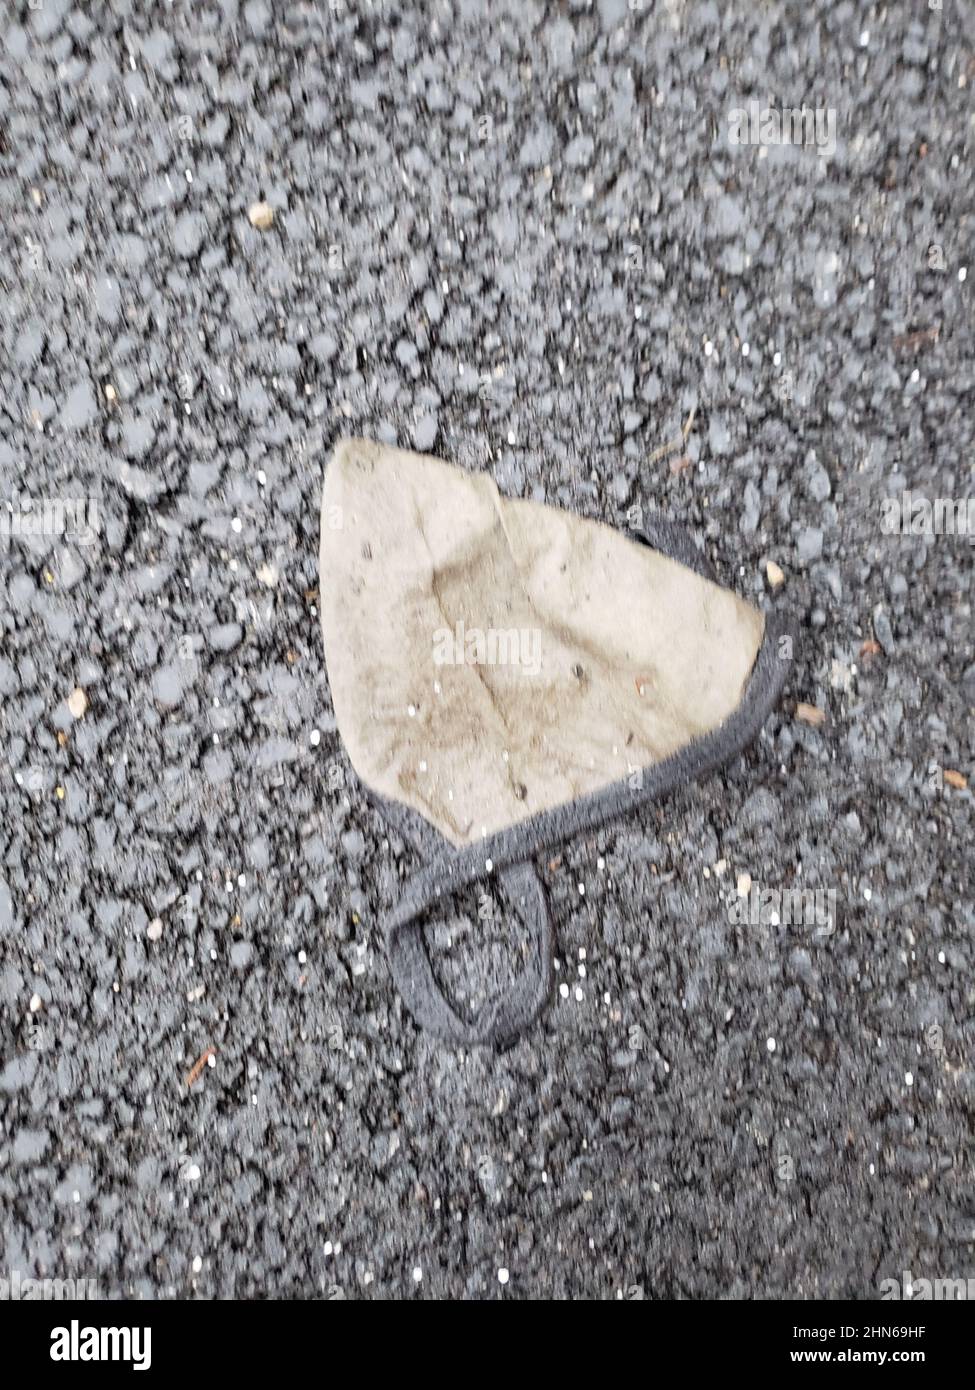 Dirty, discarded face mask on the ground Stock Photo